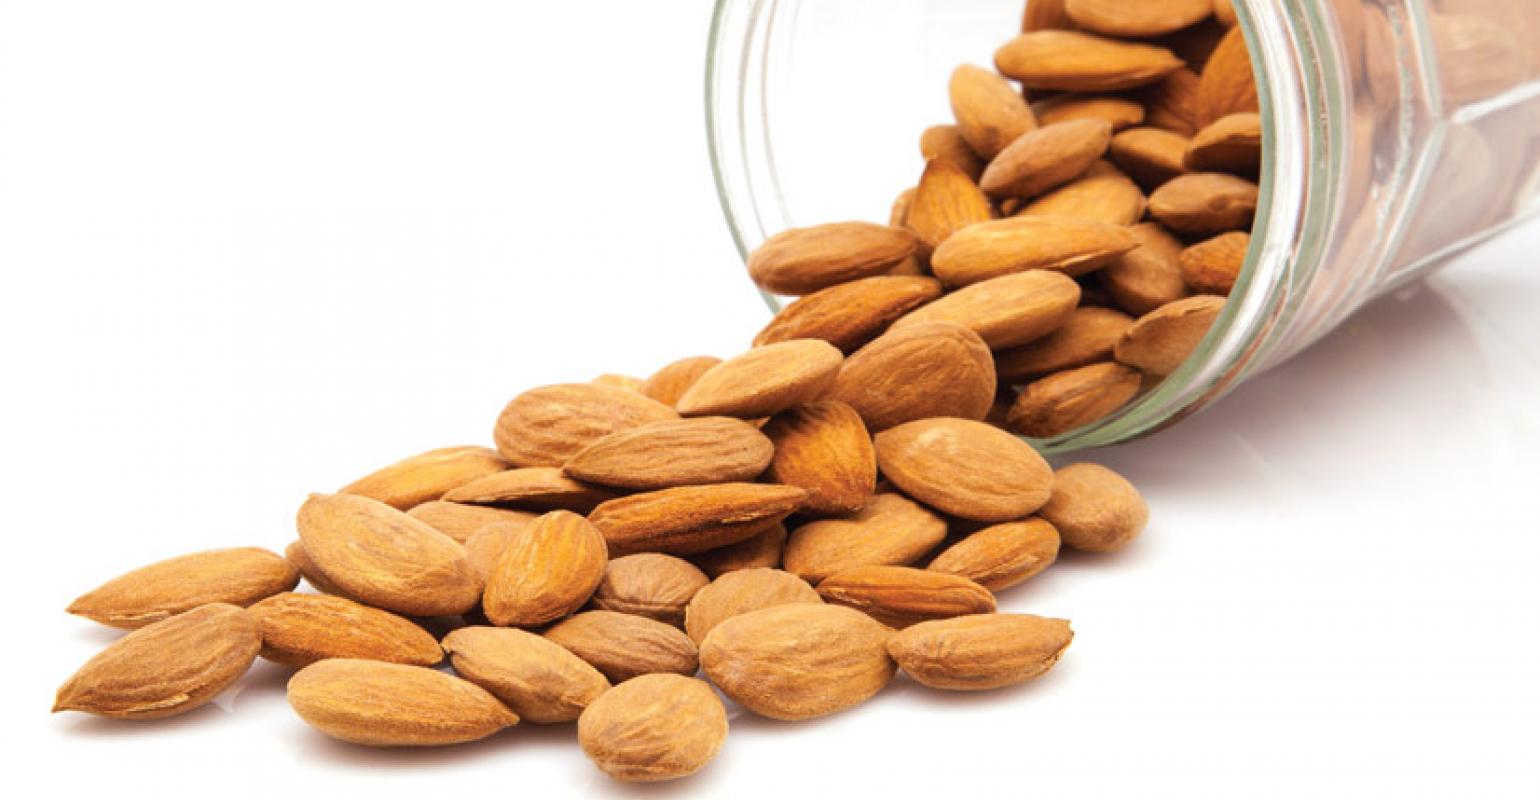 The Best Iranian almonds Supplier / Nutex , Iran dry fruit company, exports the best kind of Iranian almond at the most affordable prices around the world.